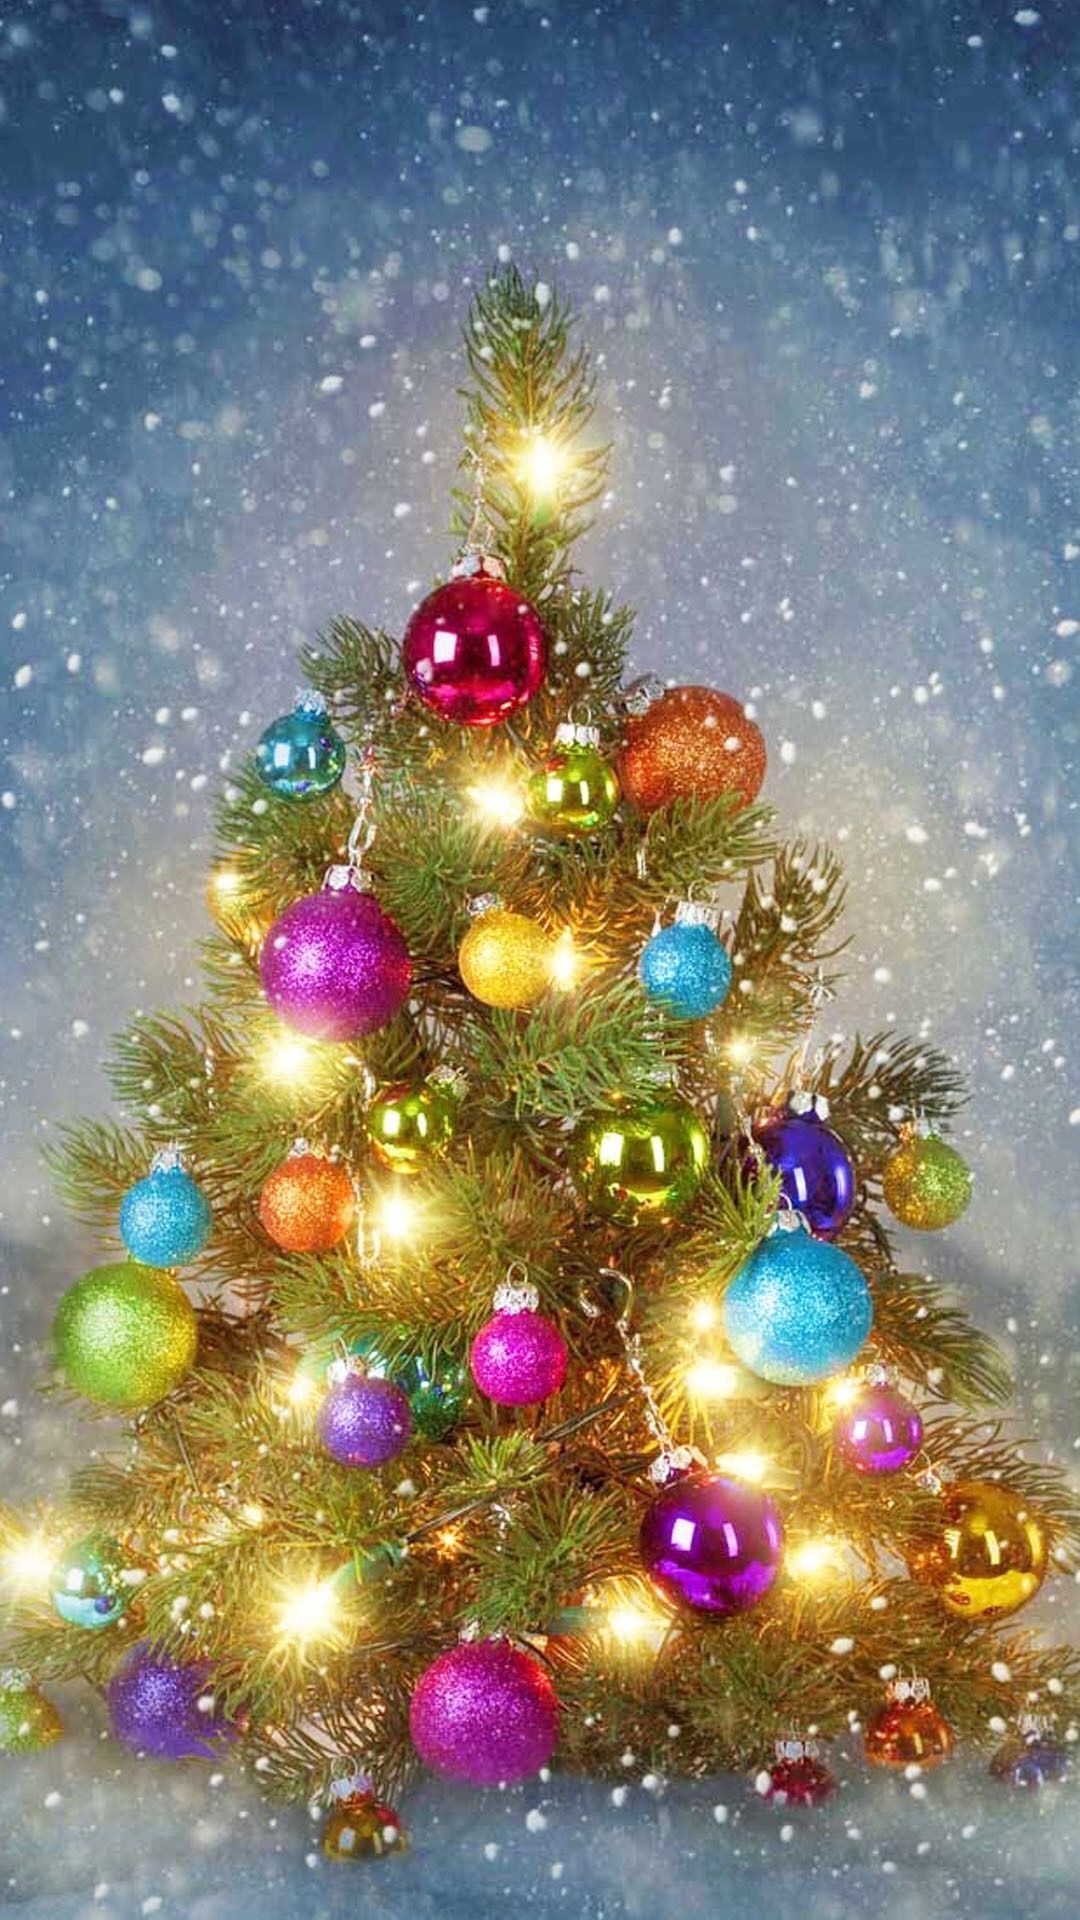 1080x1920 Scenery Wallpaper, Cell Phone Wallpapers, Phone Backgrounds, Holiday  Wallpaper, Christmas Tree Wallpaper, Best Christmas, Christmas Holidays, ...